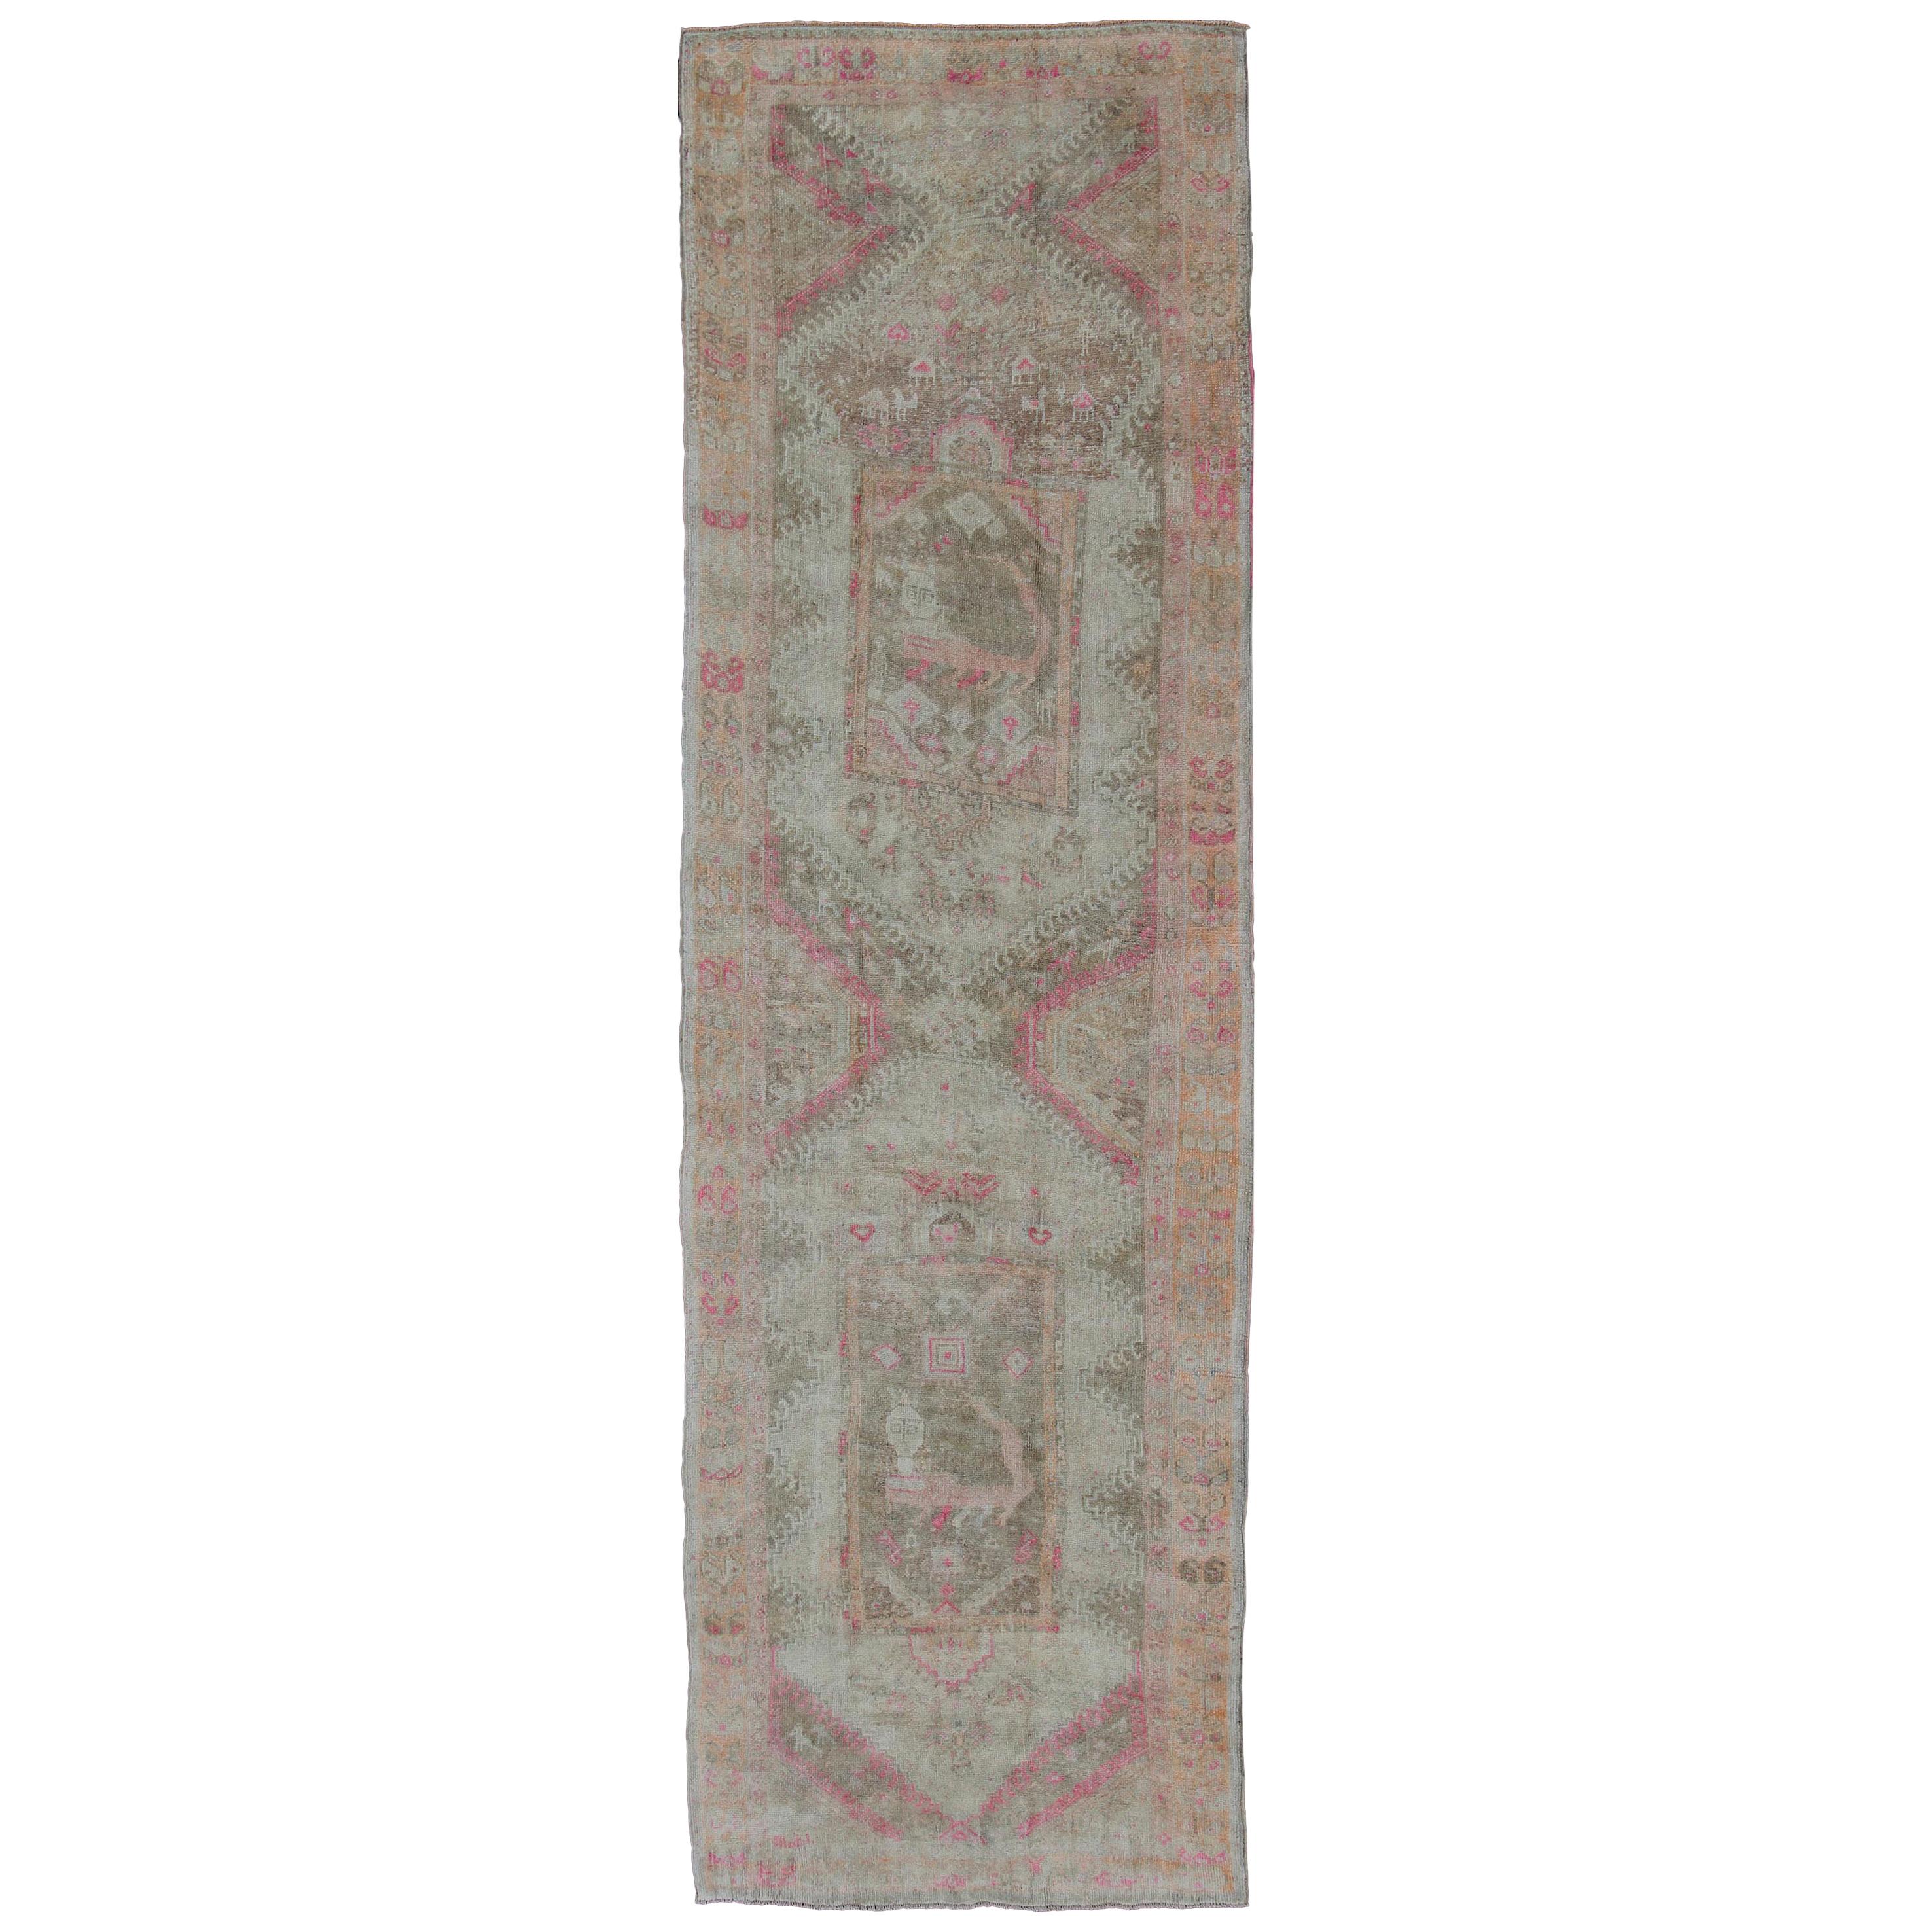 Long & Wide Runner with Medallion Design in Green, Purple, Gray, Orange & Nude